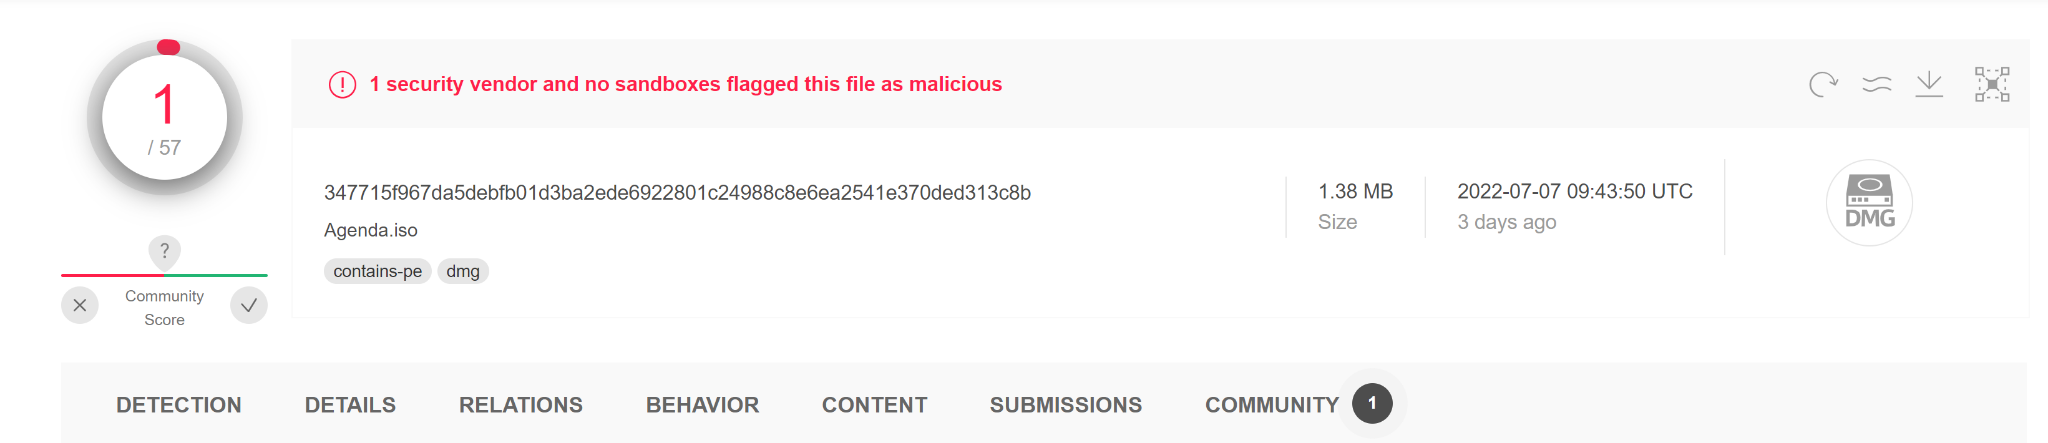 VirusTotal detections for Agenda.iso at the time of writing - "1 security vendor and no sandboxes flagged this file as malicious"